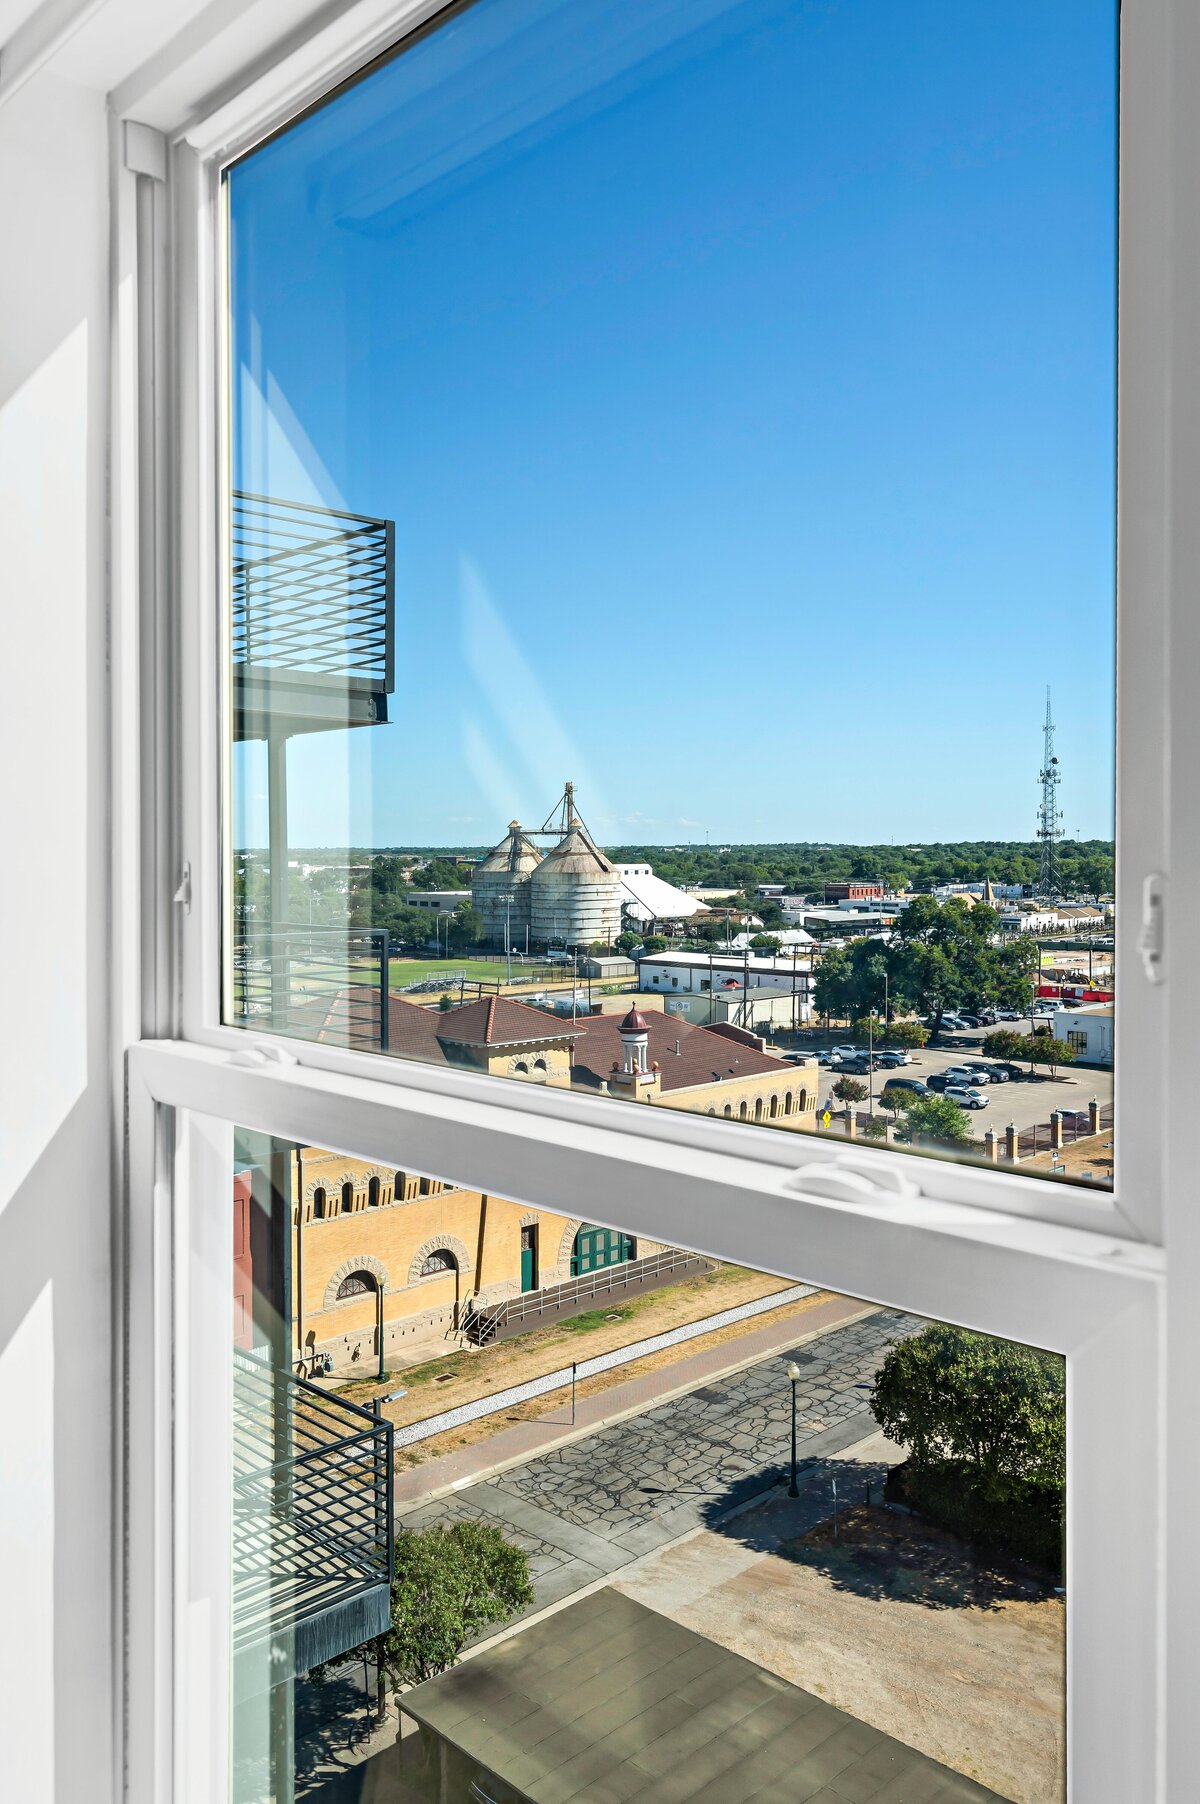 Amazing view from the top floor of the historic Behrens building in downtown Waco, TX